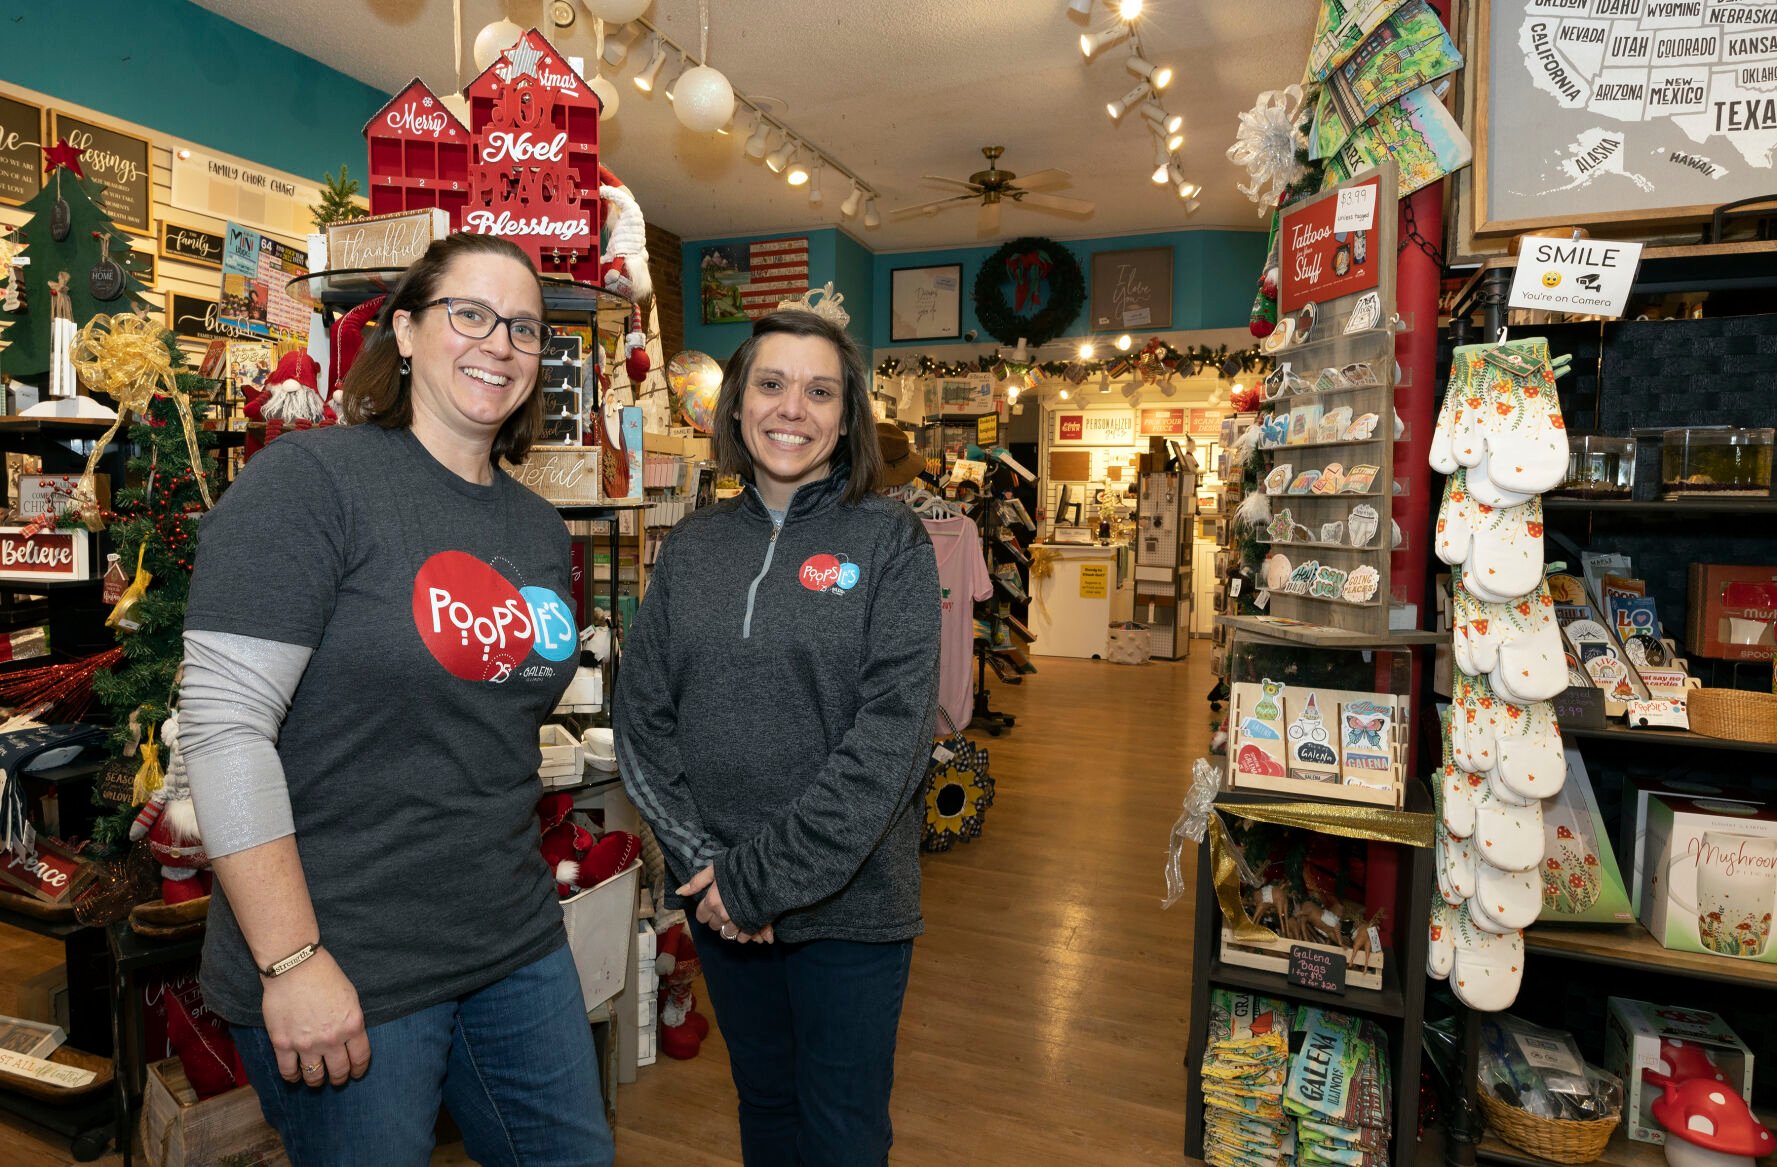 Alana Turner (left) and Traci Lyden are co-owners of Poopsie’s in Galena, Ill.    PHOTO CREDIT: Stephen Gassman